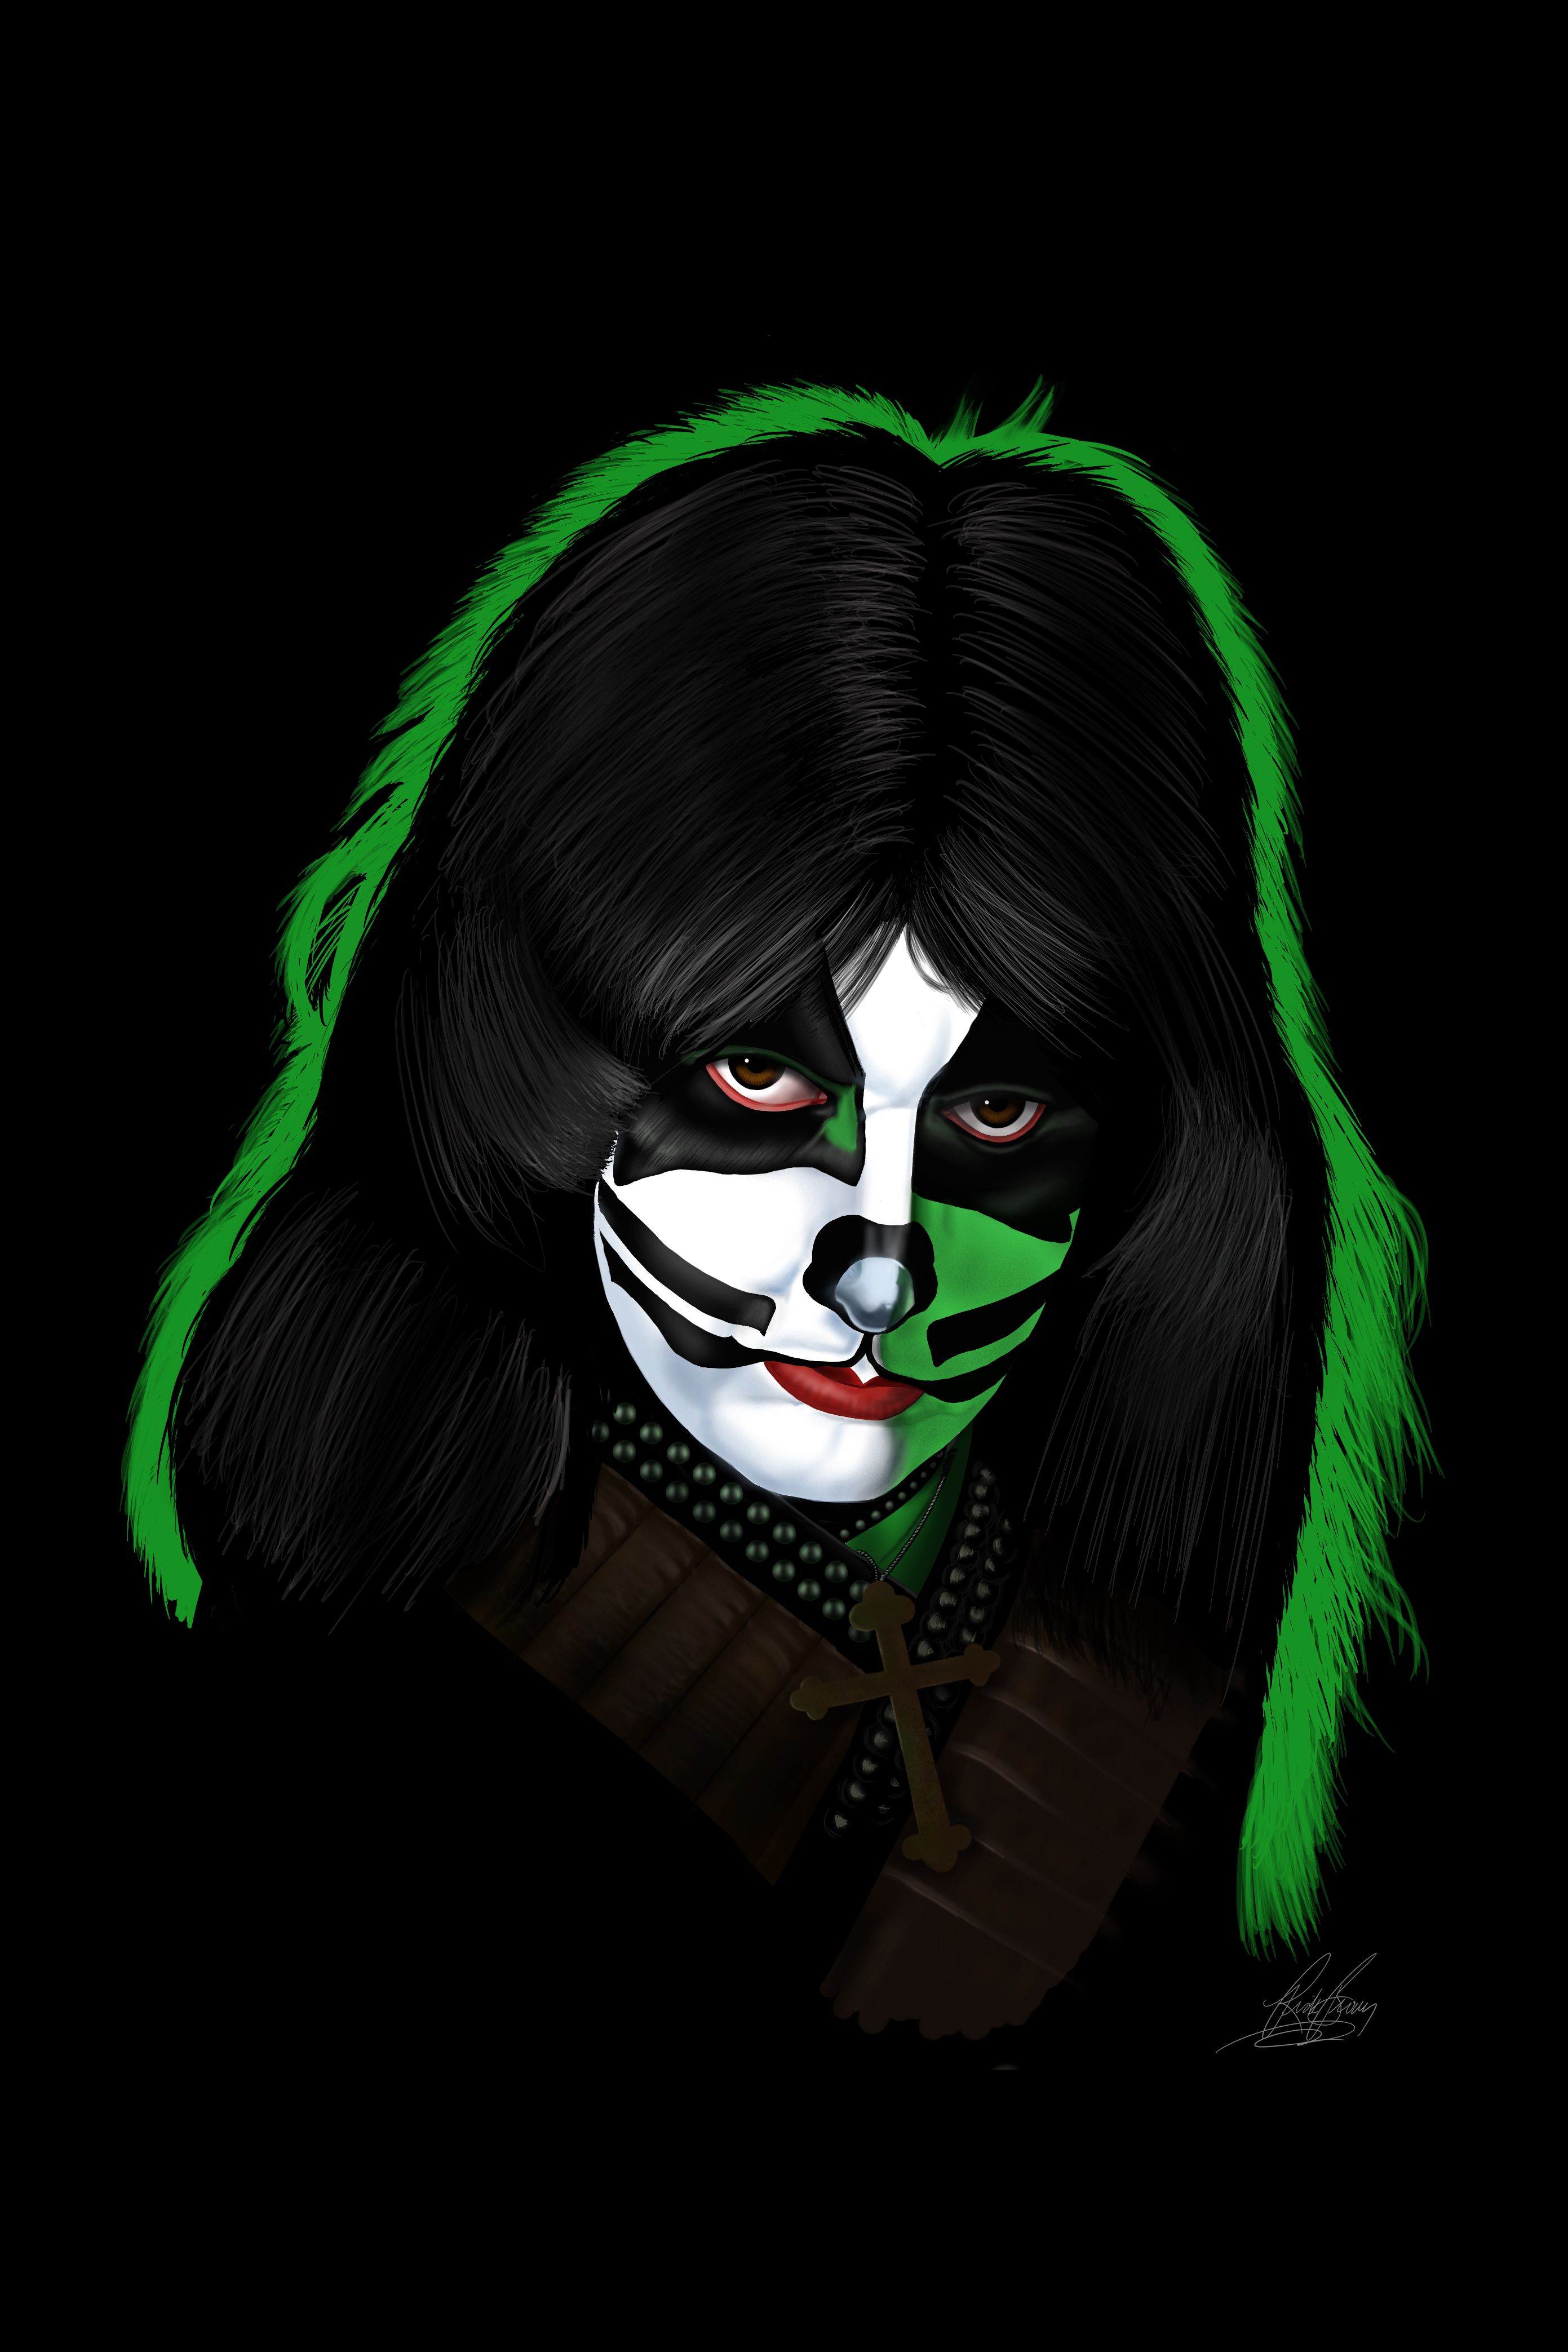 The Catman By Rick Brown Peter Criss Kiss Album Covers Art